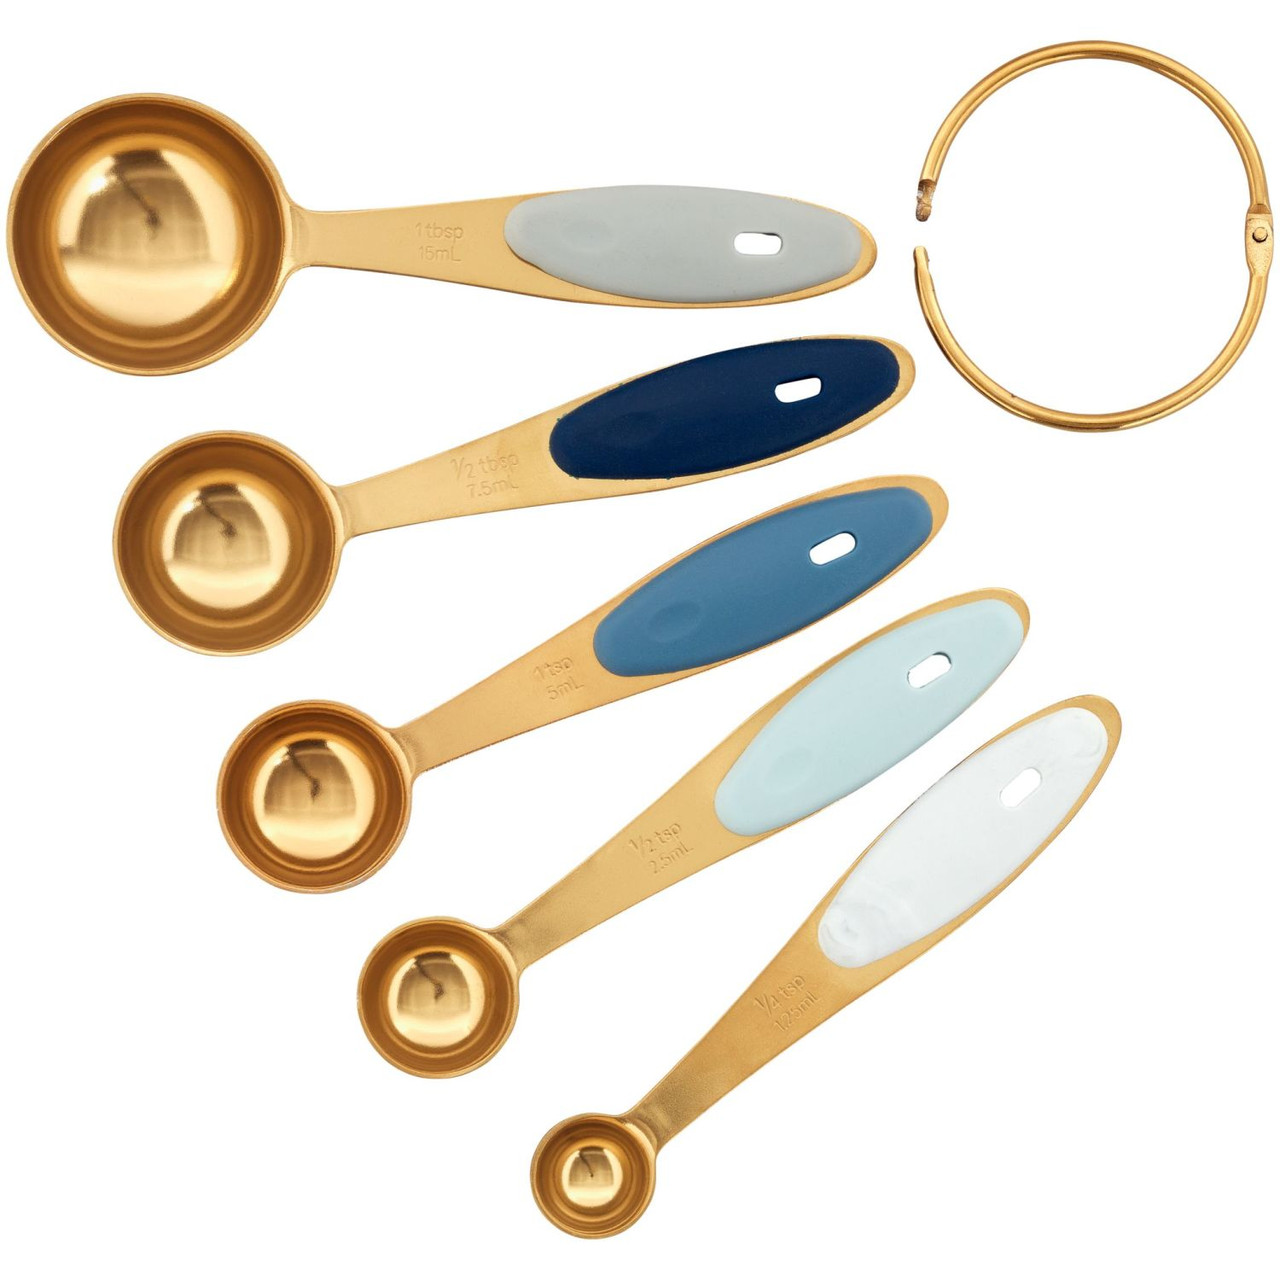  Gold Measuring Cups and Spoons Set (19PCS Set - Golden